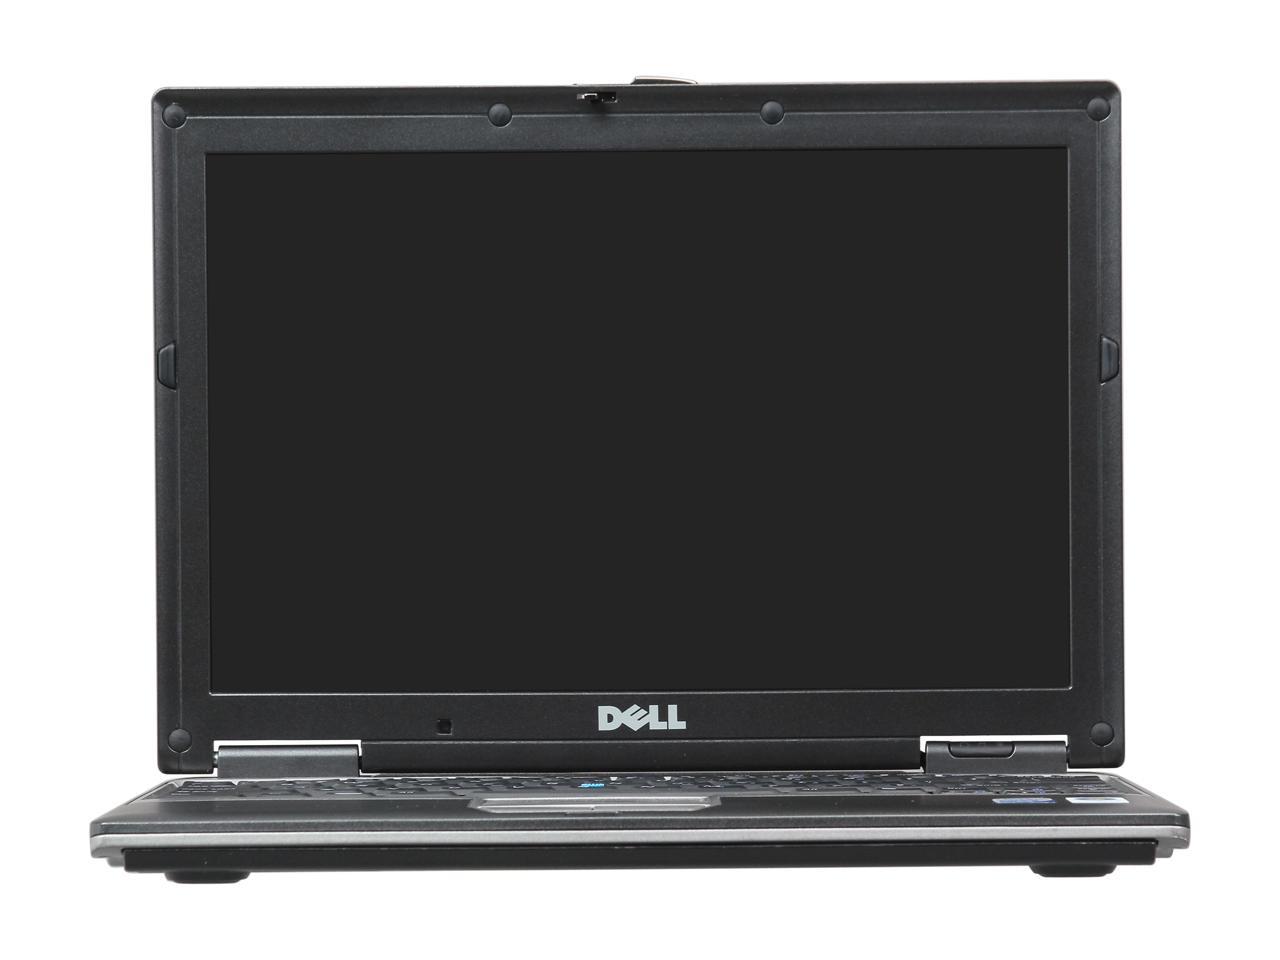 Refurbished: DELL Laptop Latitude D430 Intel Core 2 Duo 1.20 GHz 1 GB